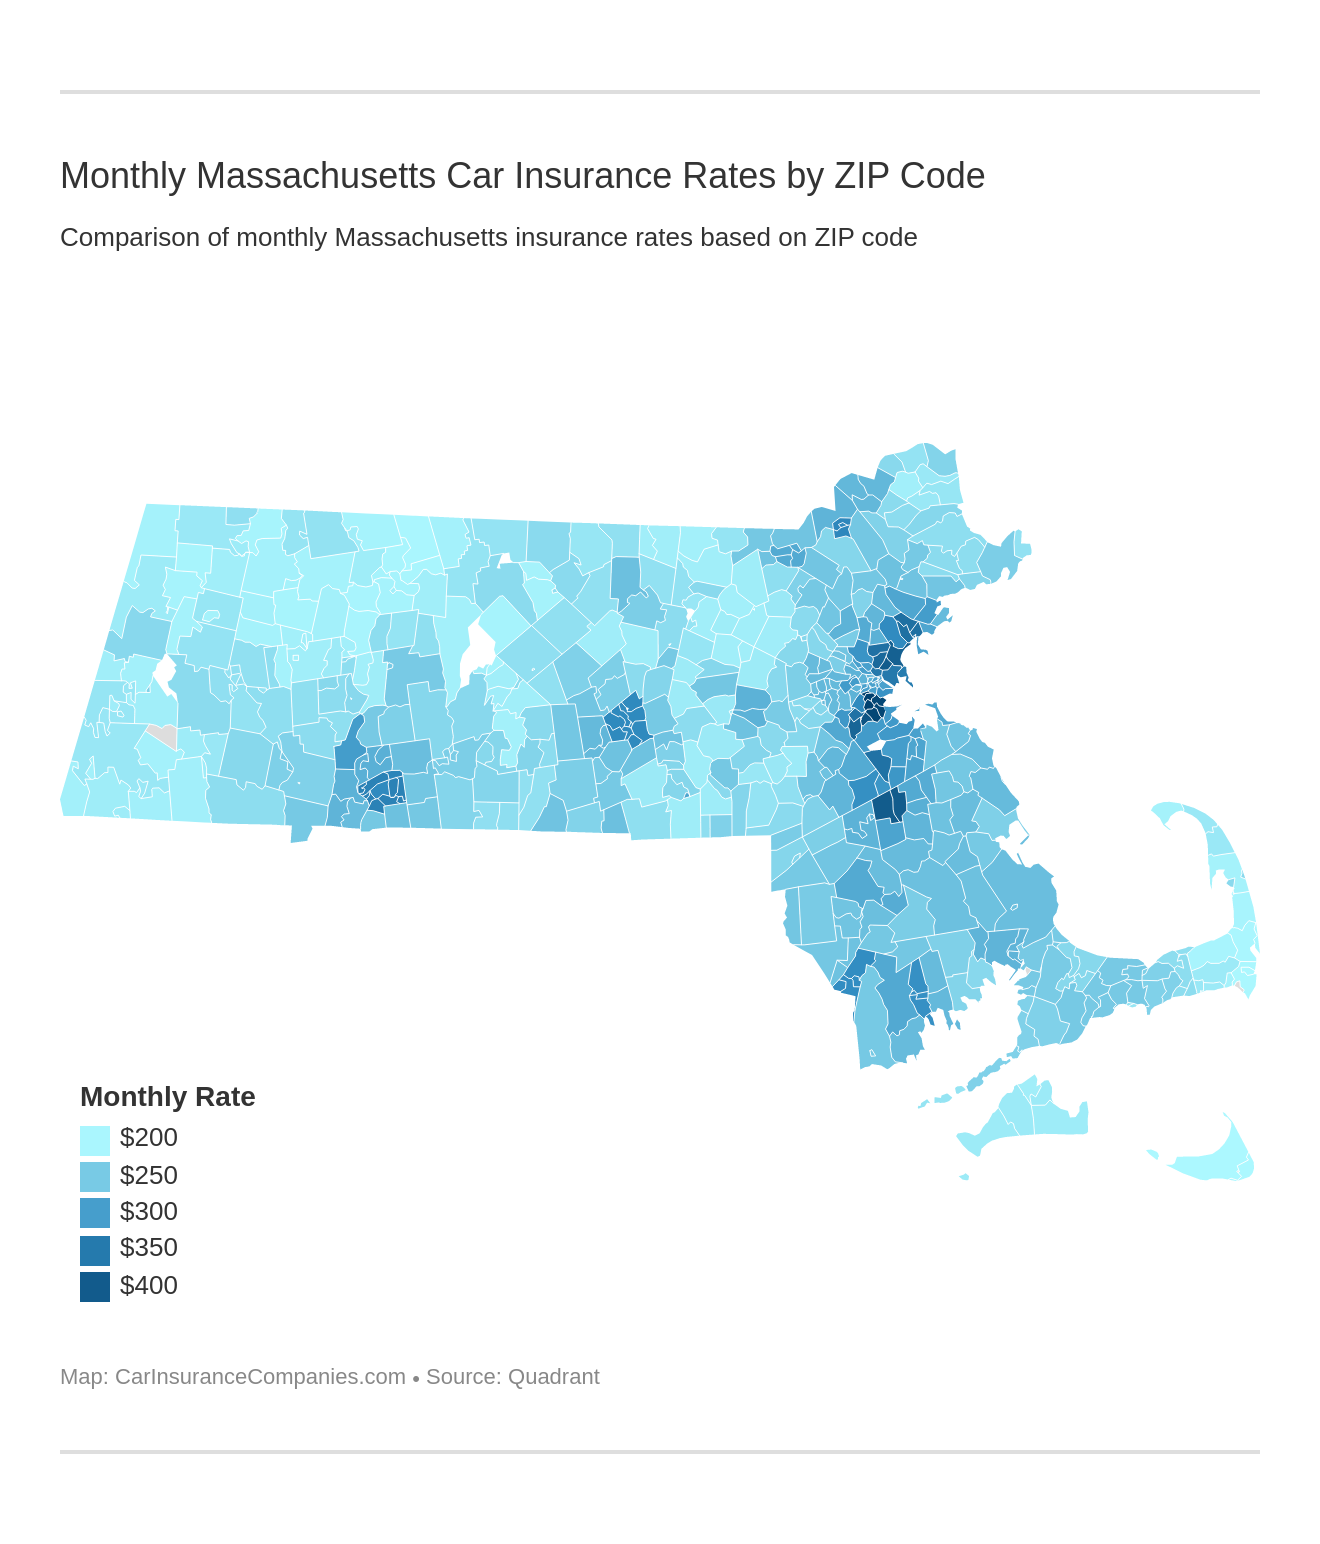 Monthly Massachusetts Car Insurance Rates by ZIP Code